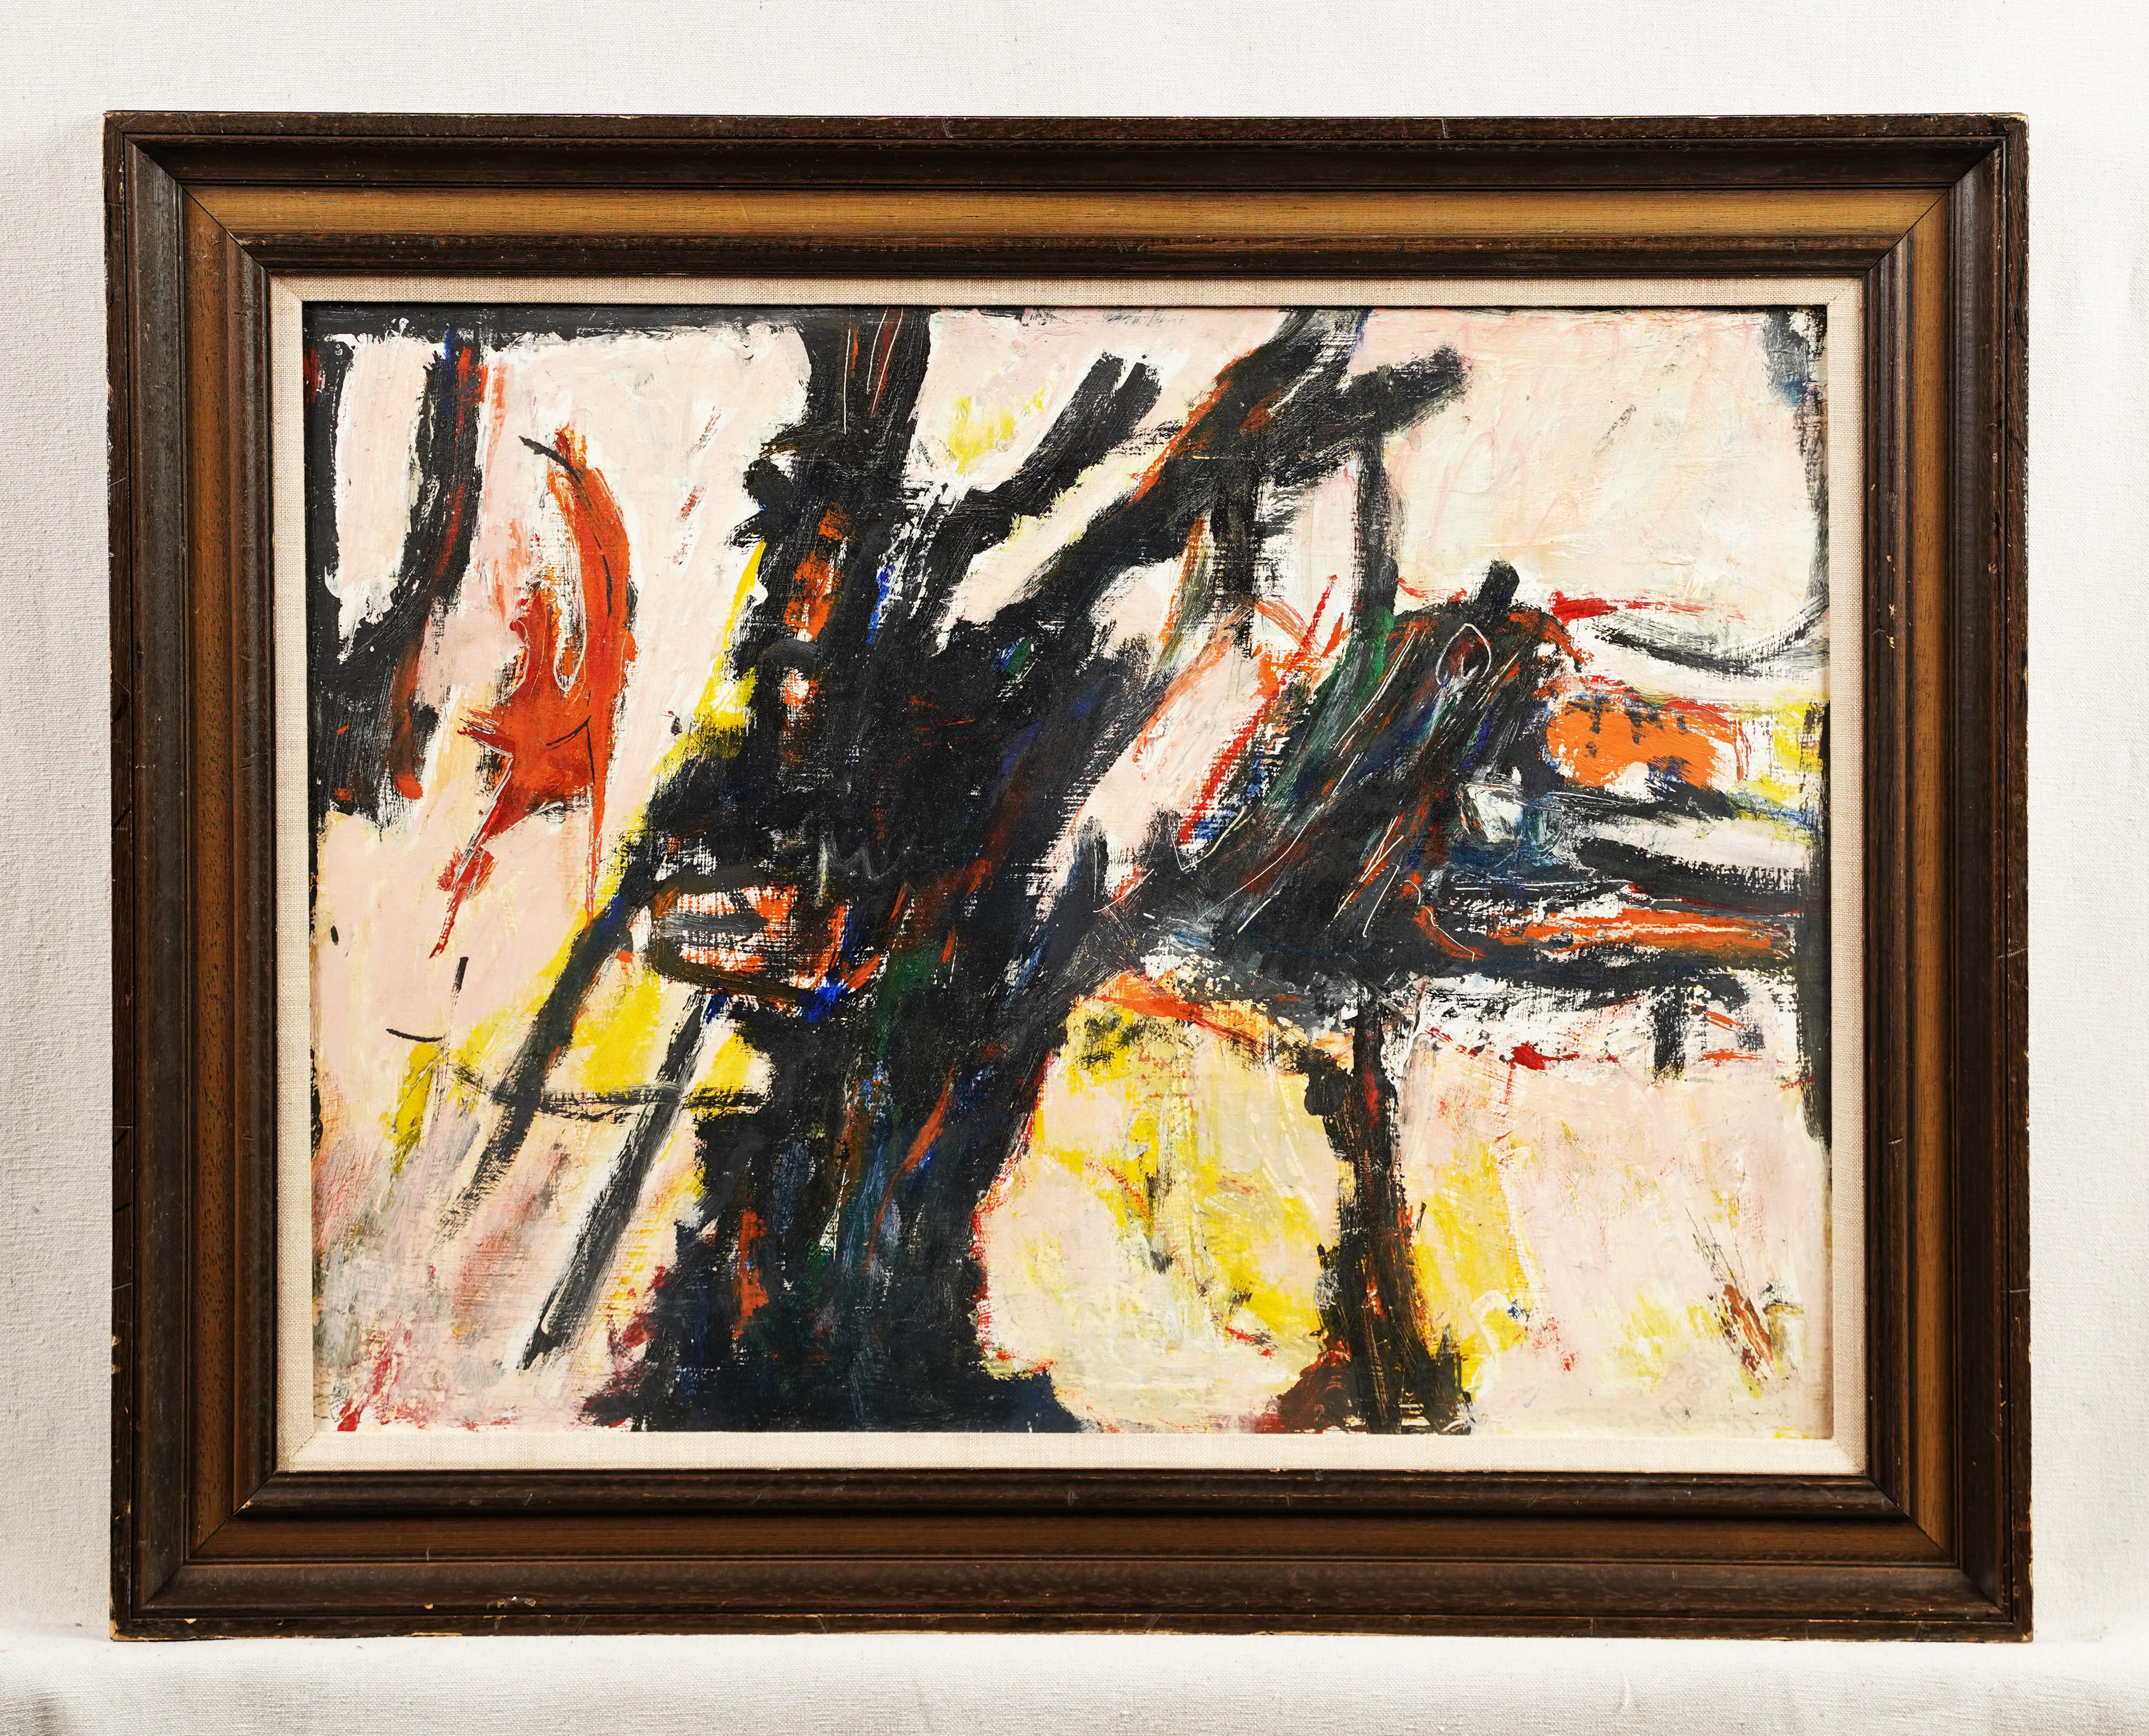 Antique American signed abstract expressionist oil painting.  Oil on board.  Signed.  Framed.  Image size, 24L x 18H.  Circa 1960.  This painting has a nice period frame and stong colors.  It's a very nice period example of abstract expressionist. 